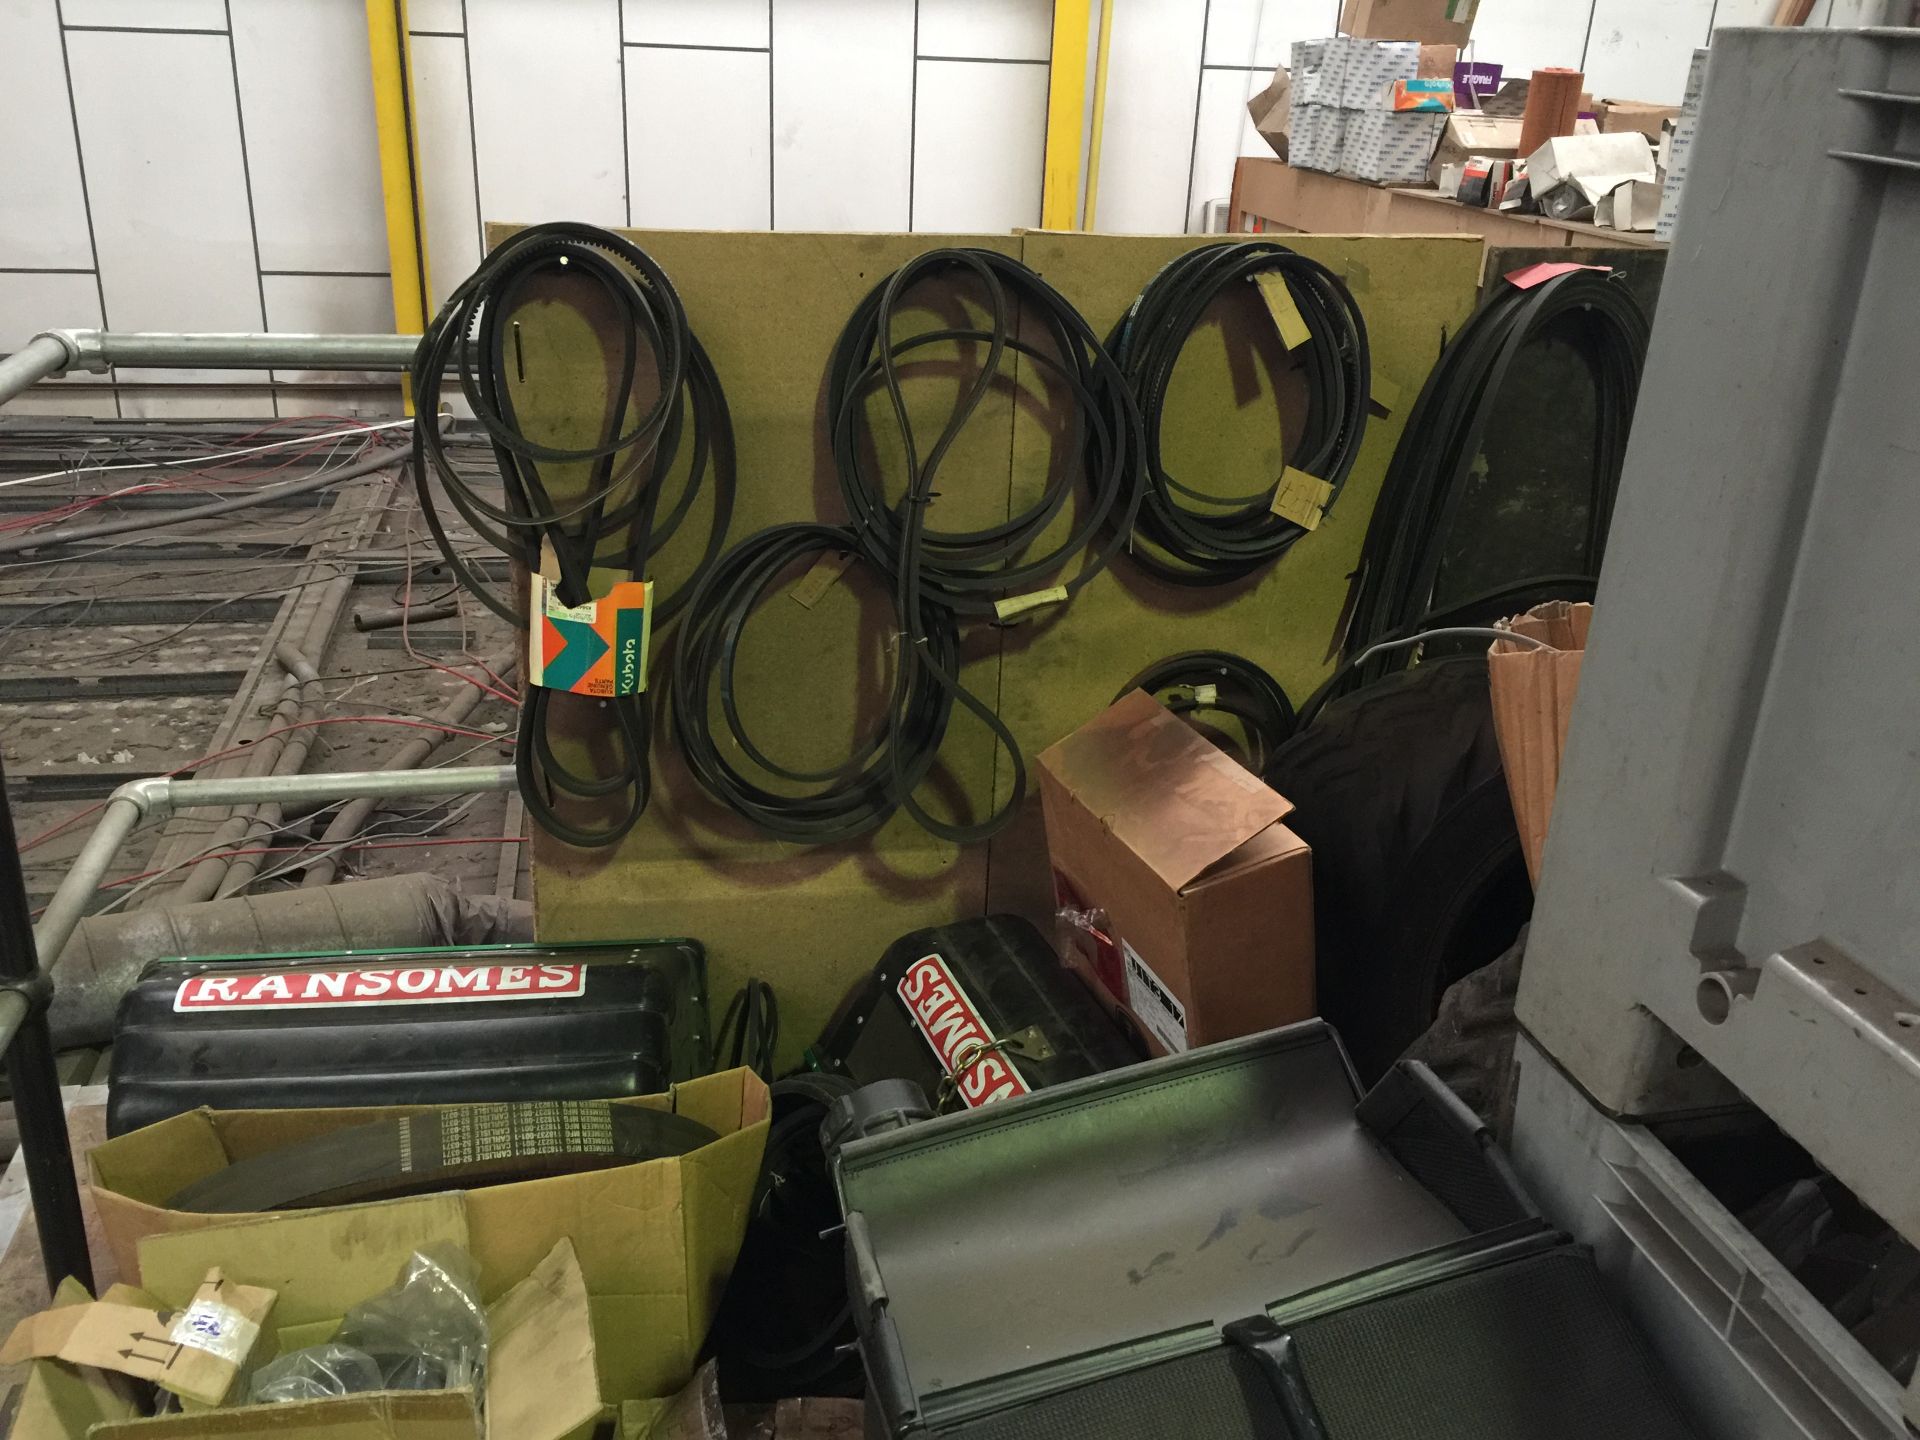 Quantity of spares including fan belts, spare tyres, filters, etc, as indicated, 3 stillages 2 mobil - Image 5 of 11